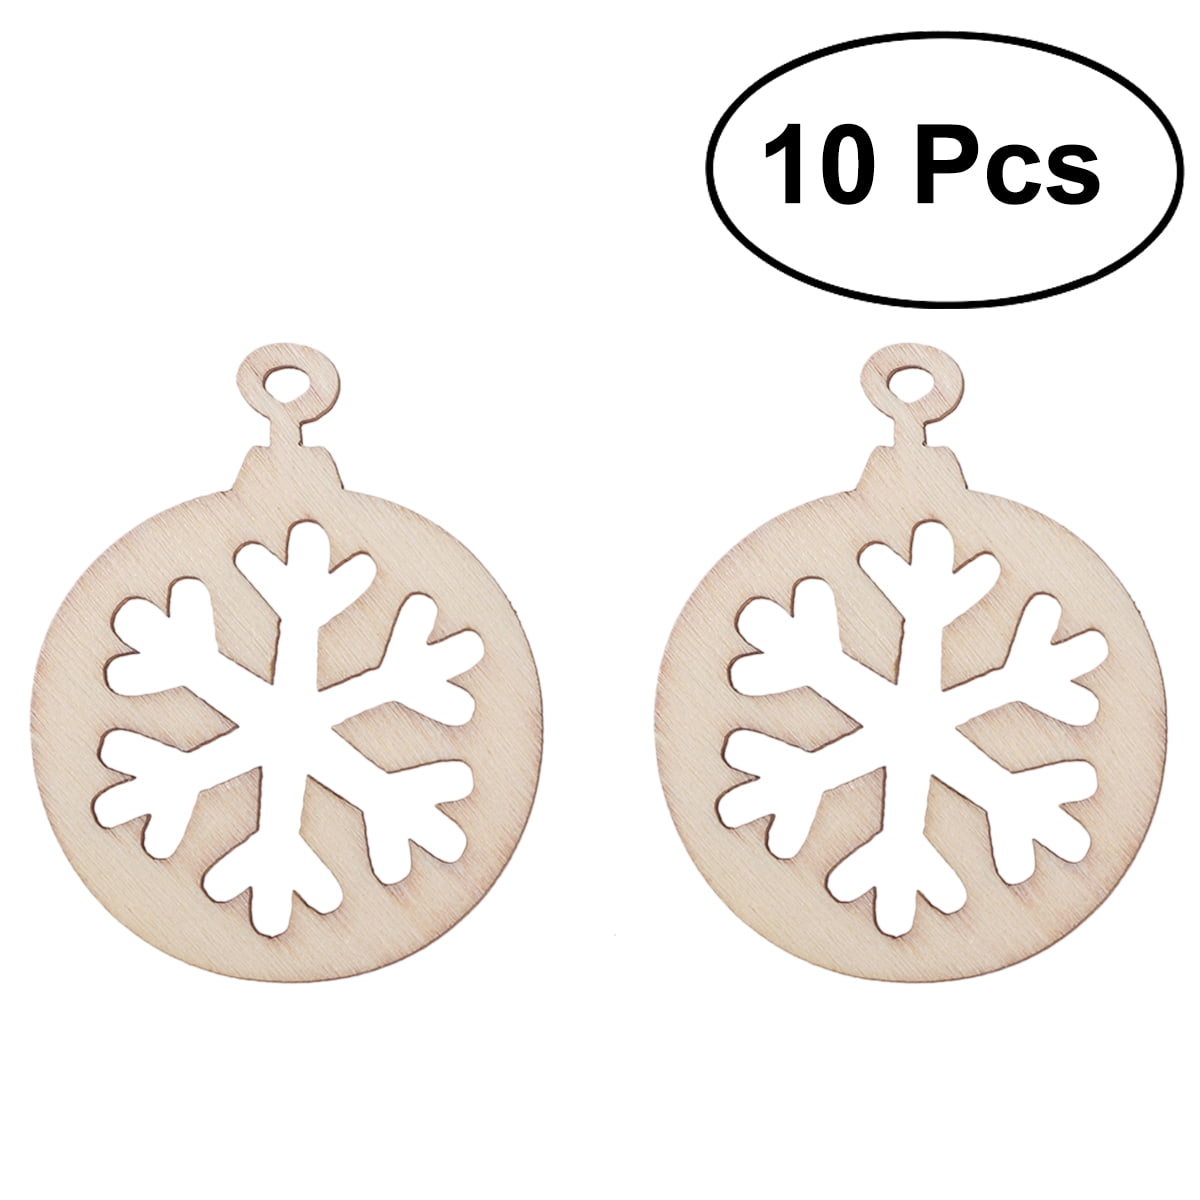 10Pcs/set Hollow Wooden Snowflakes Christmas Tree Hanging Decor Party Ornaments 